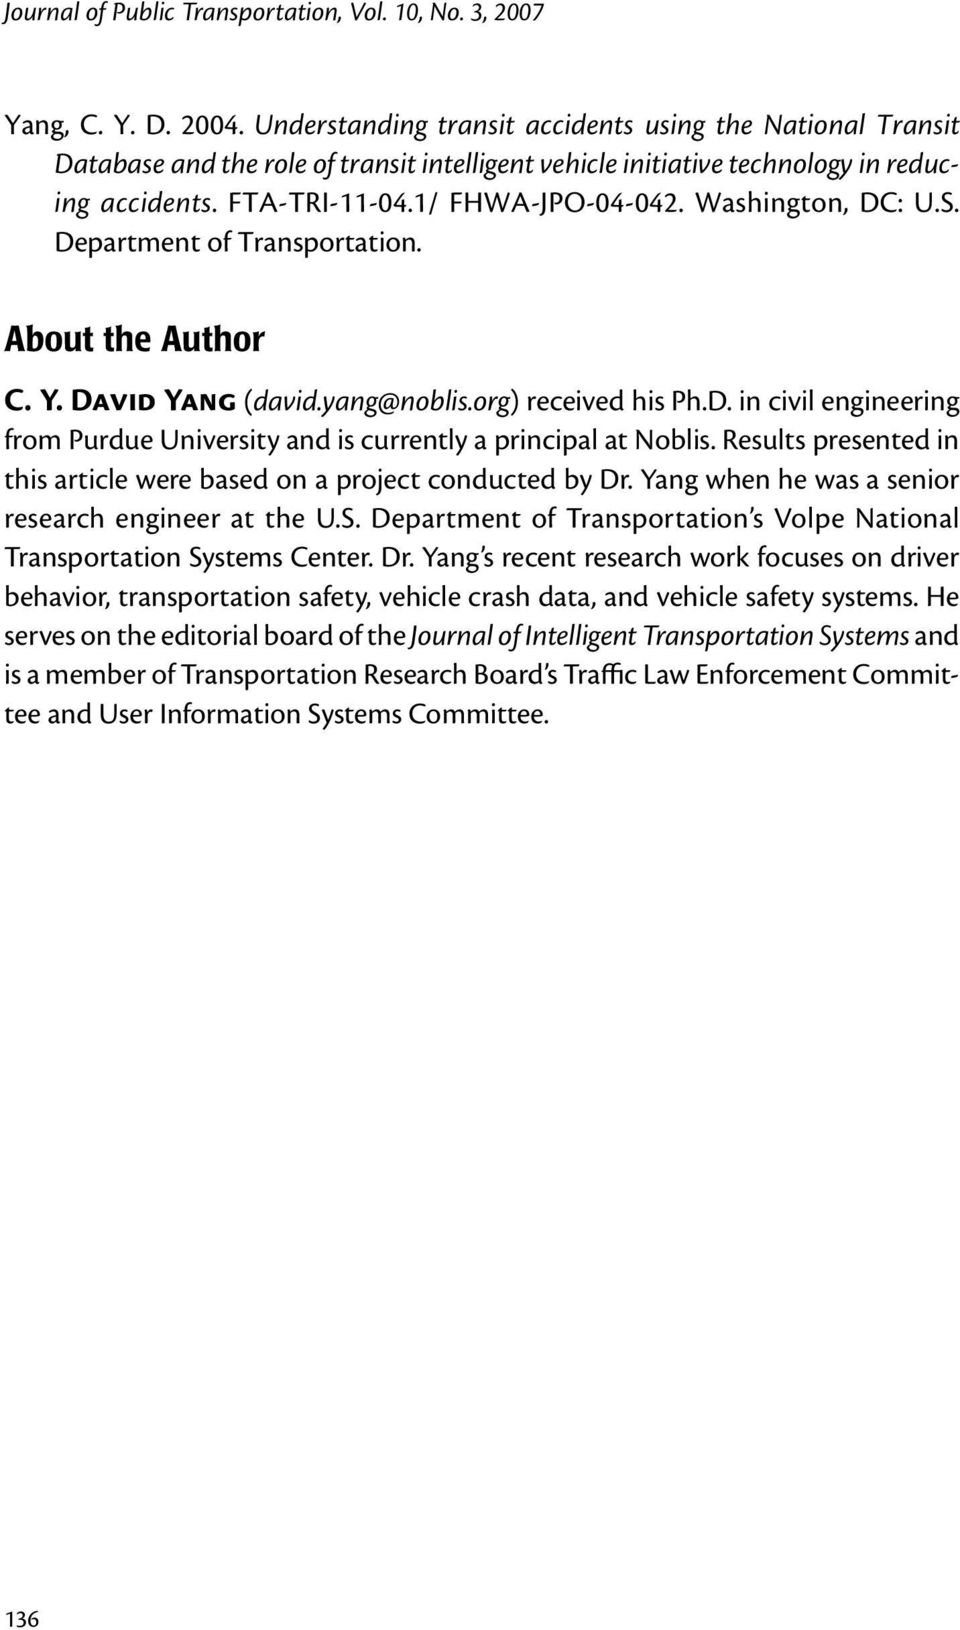 Washington, DC: U.S. Department of Transportation. About the Author C. Y. David Yang (david.yang@noblis.org) received his Ph.D. in civil engineering from Purdue University and is currently a principal at Noblis.